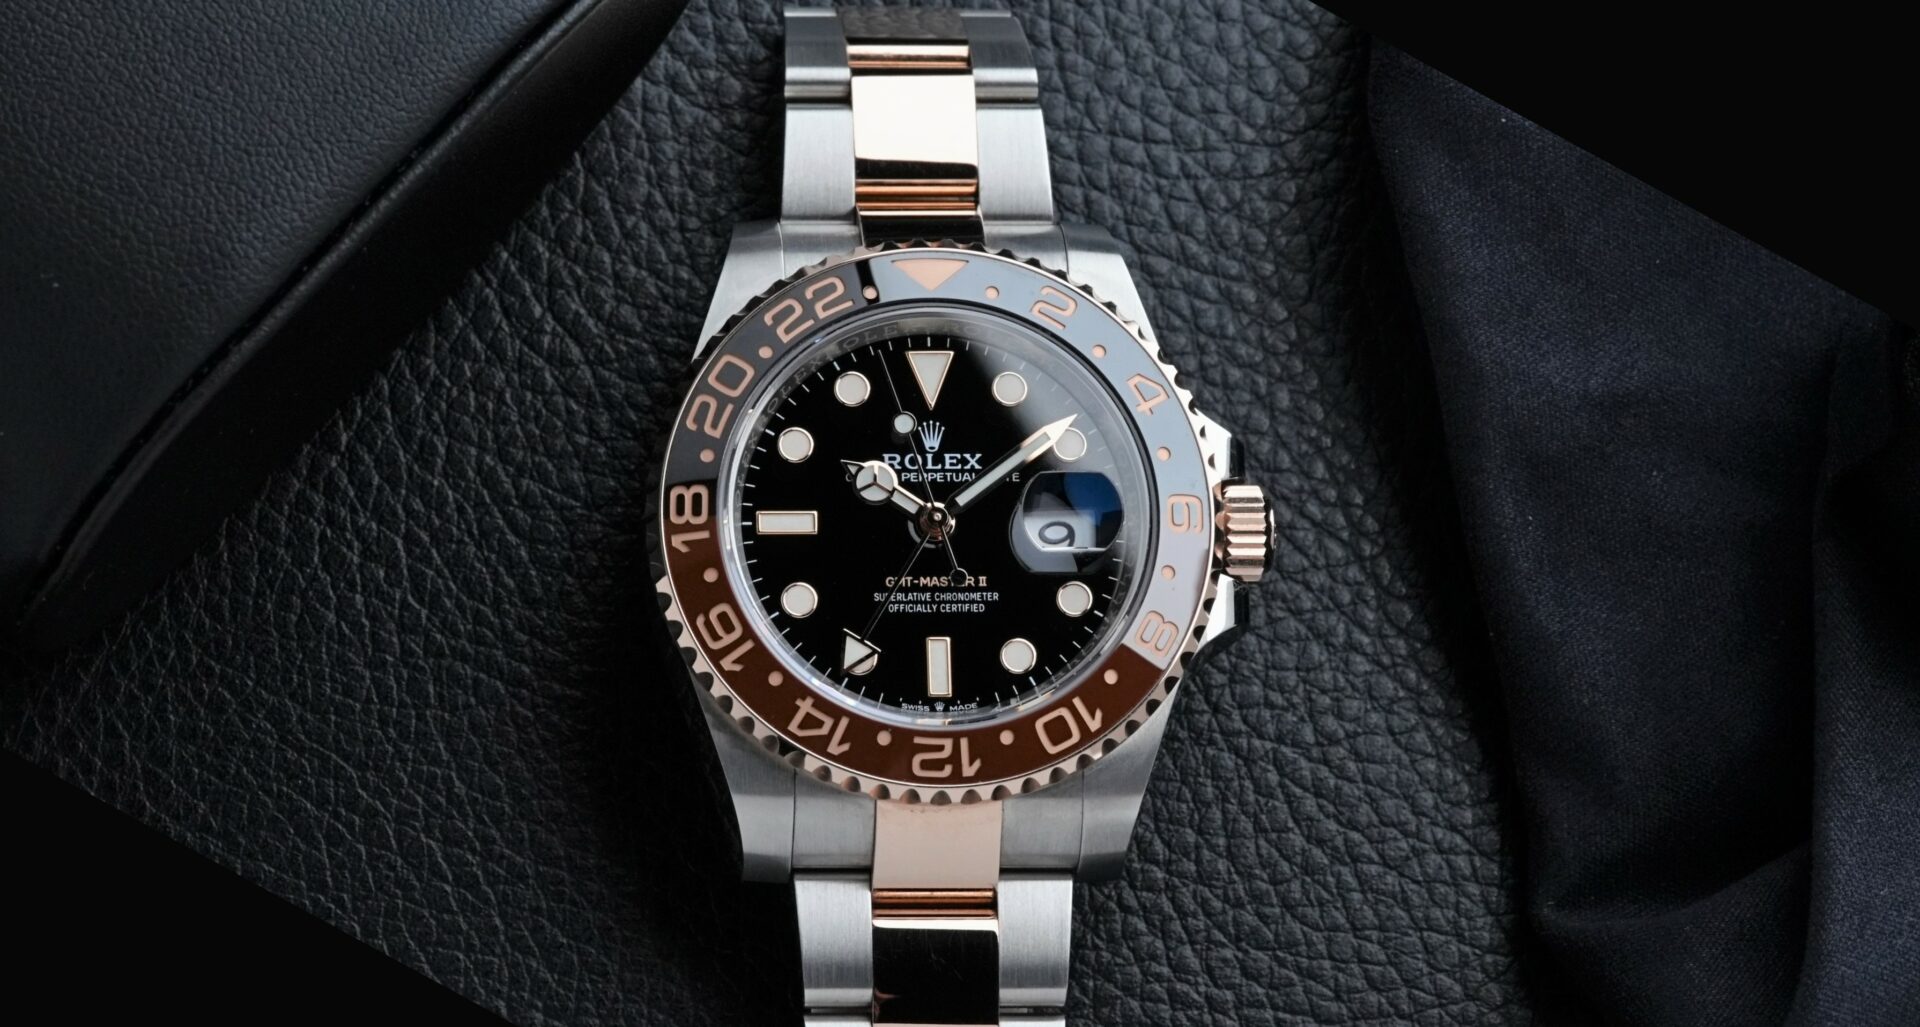 Rolex GMT-Master II Rootbeer Ceramic watch on display up close.